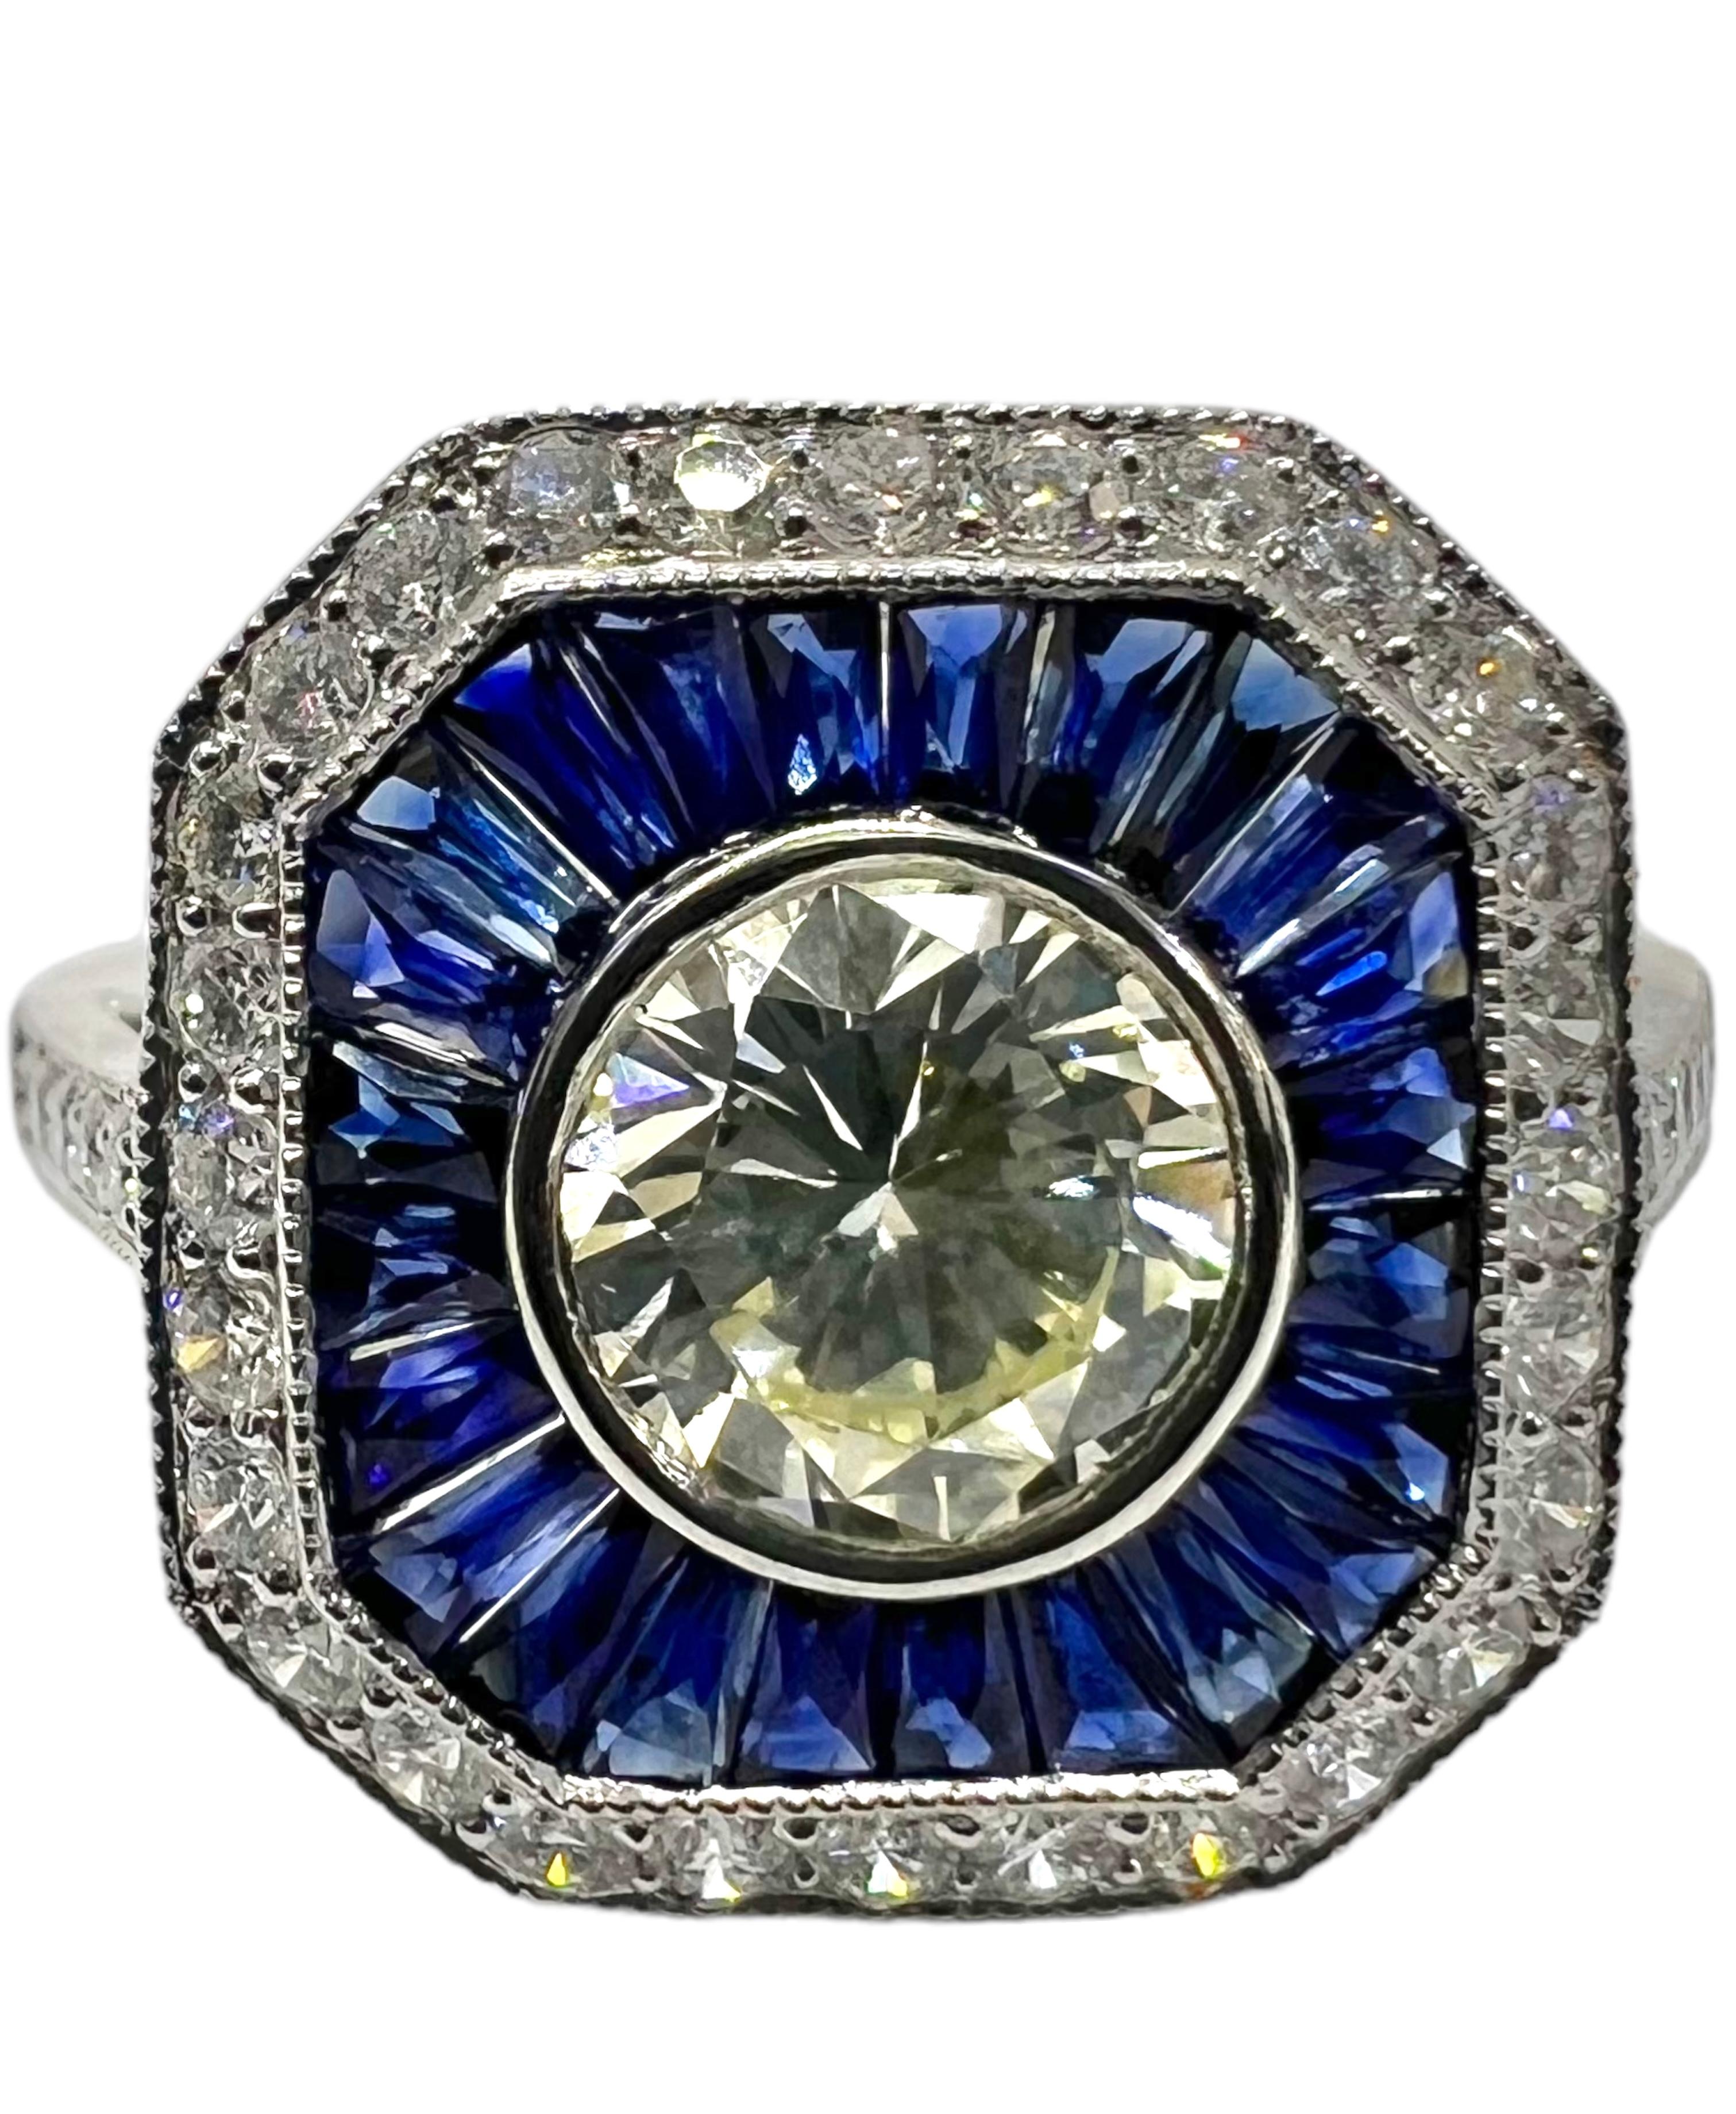 An art deco platinum ring with O-P VS2 .86 carat center round diamond accented with 0.84 carat blue sapphire and 0.43 carat small round diamonds.

Sophia D by Joseph Dardashti LTD has been known worldwide for 35 years and are inspired by classic Art